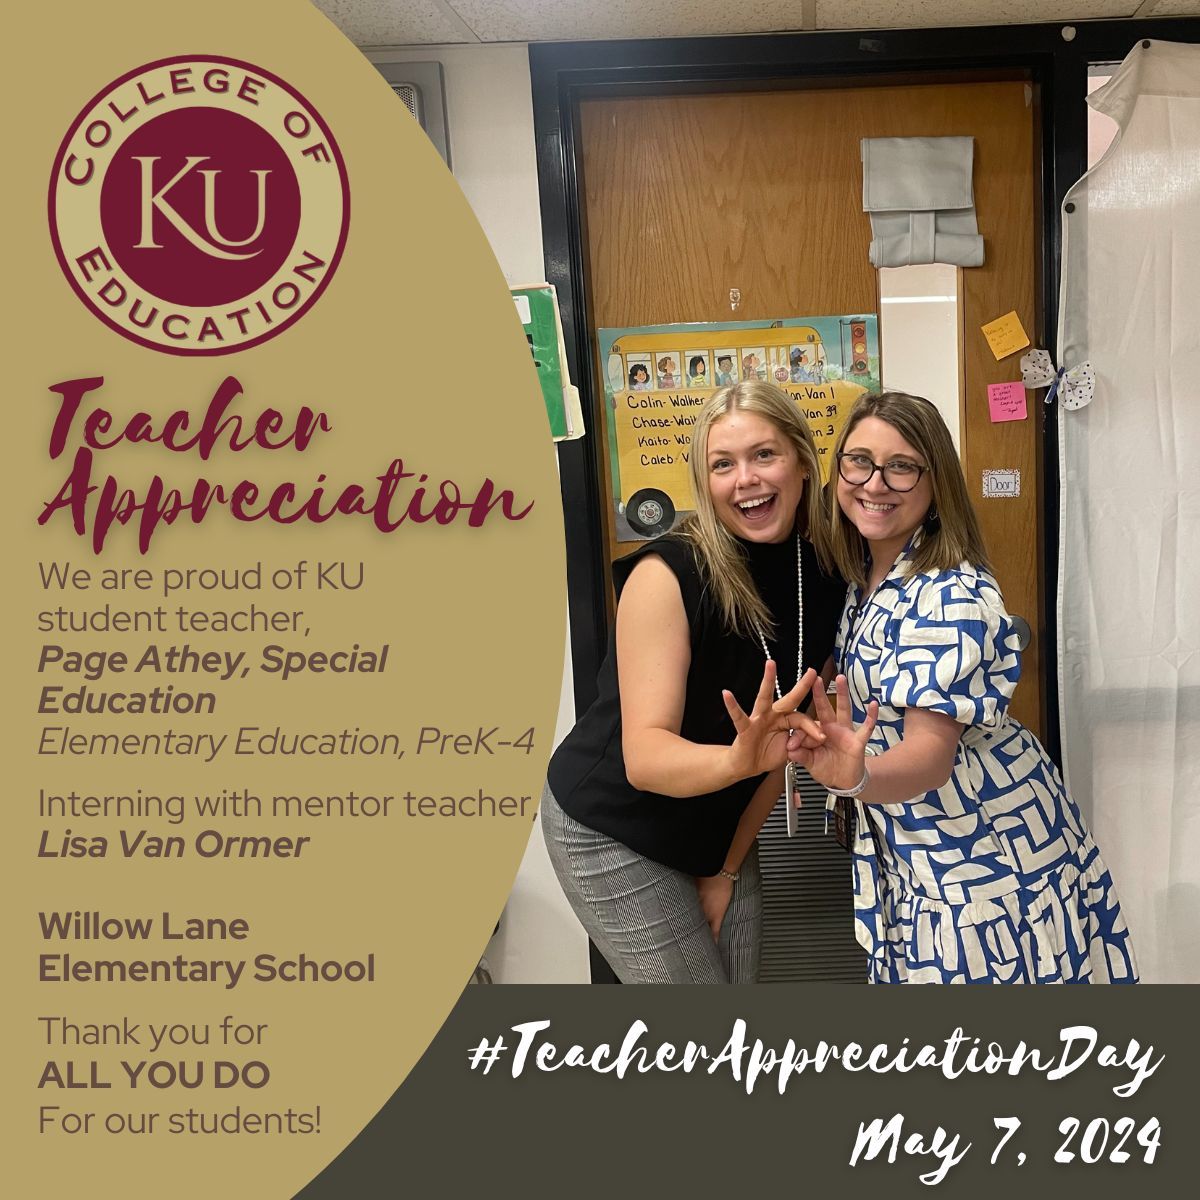 KU student Page Athey is #StudentTeaching with mentor Kendra Boris in Autistic Support at John S. Clarke Elementary School in @PASDTide SD. 
Thank you for all you do for our students!
@KutztownU @KutztownAlumni  #NAESP #NASET #TeacherAppreciation #EducationAtKU #KUCOE